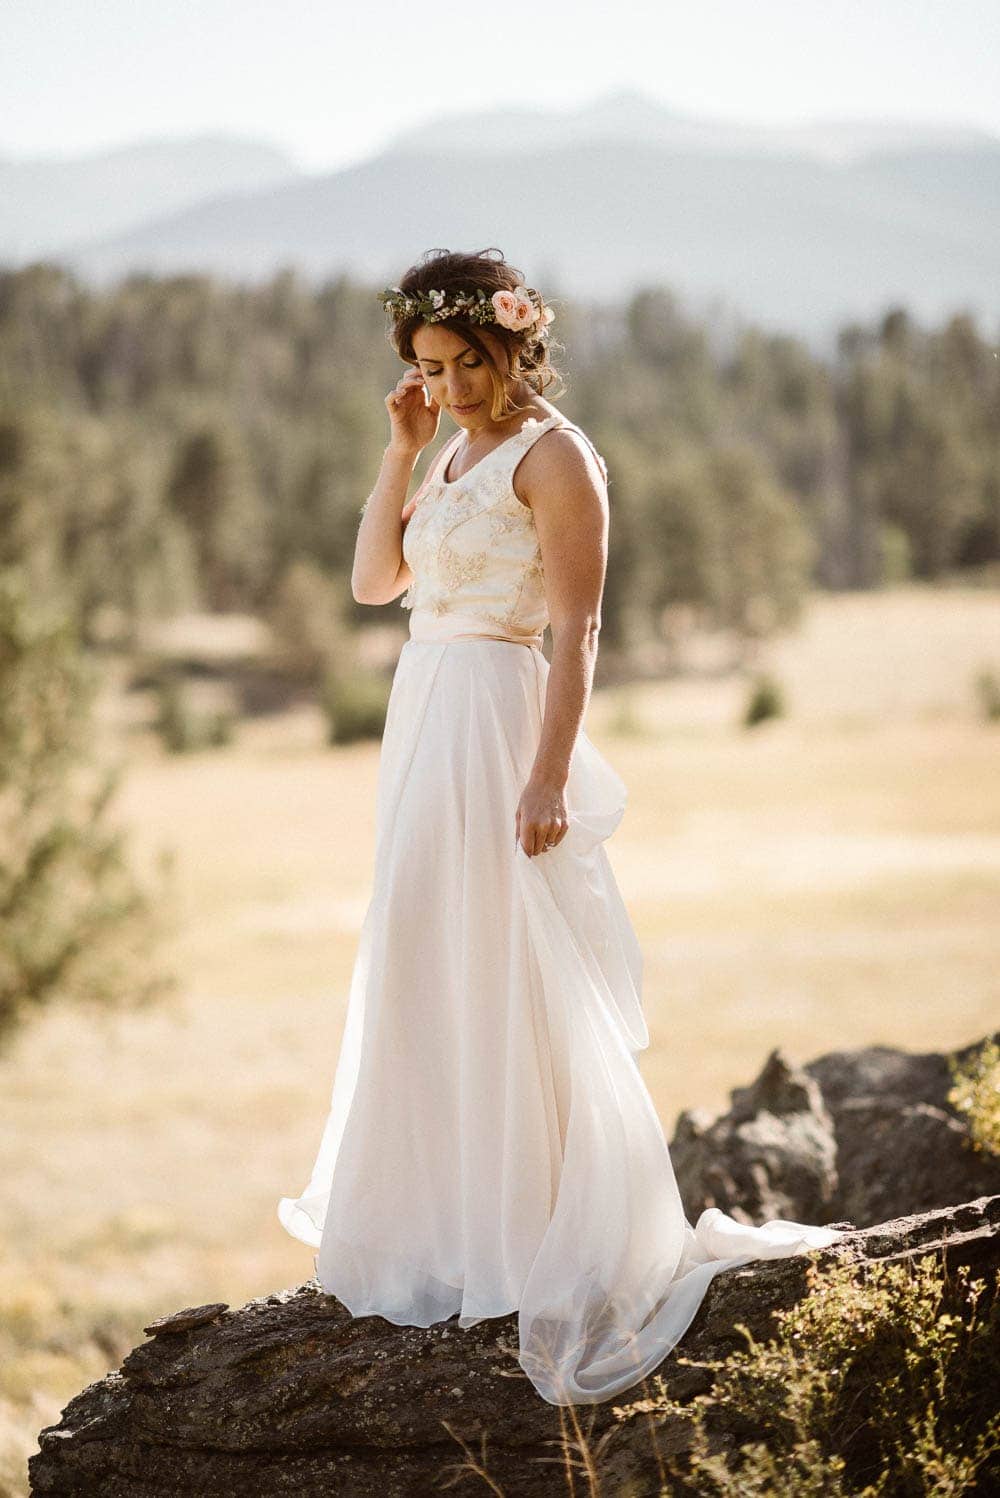 Bride stands on a rock and looks down, and holds the skirt of her white dress. She is wearing a flower crown with light pink roses.